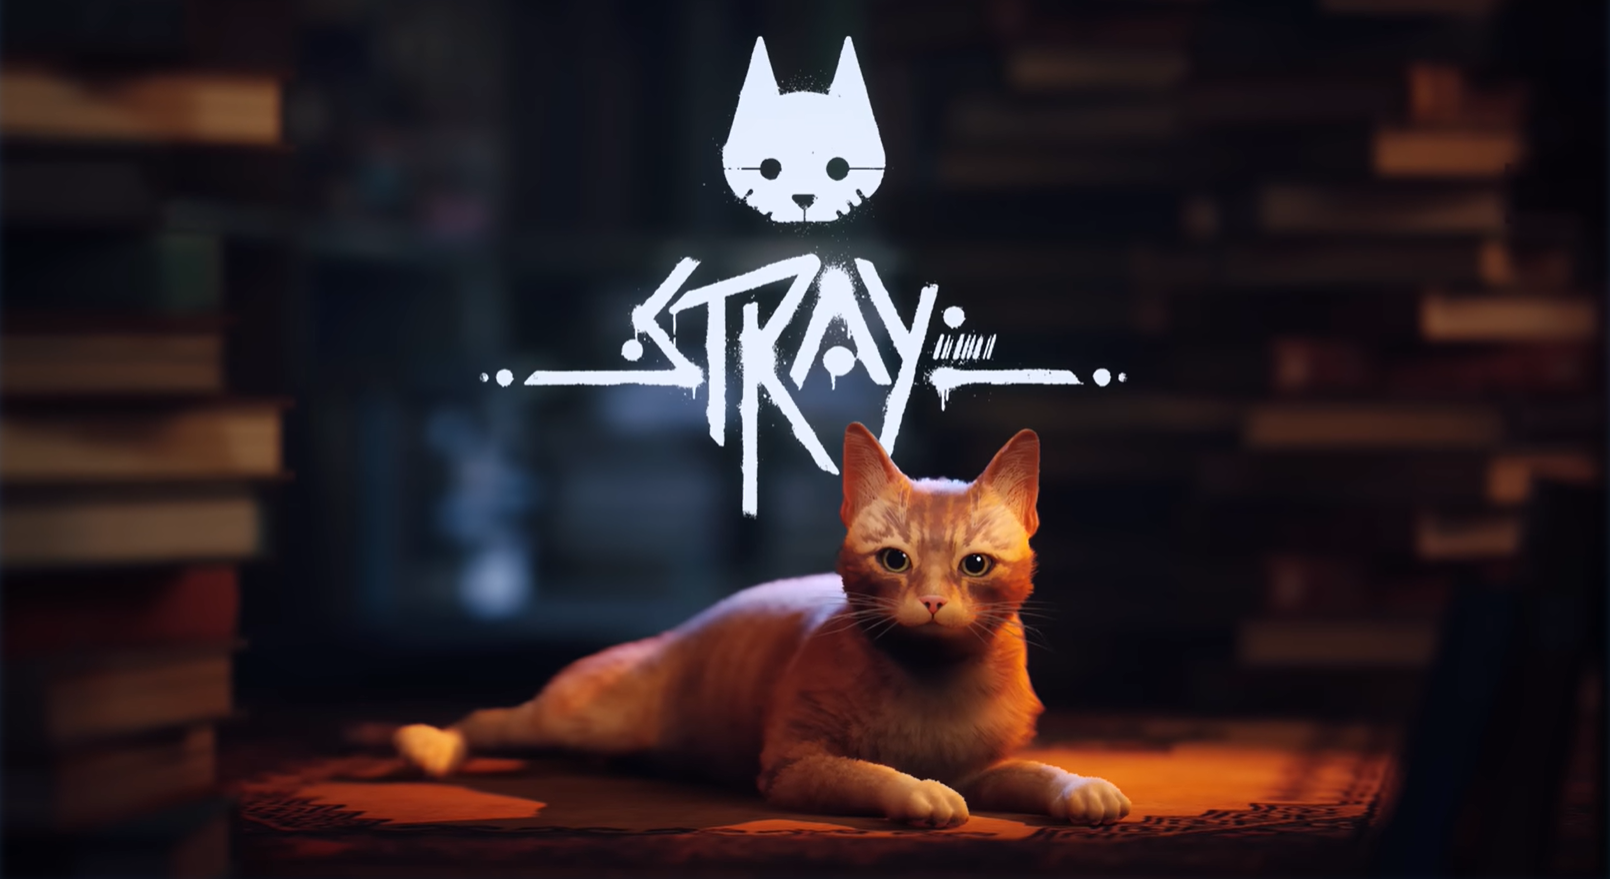 Stray cat game logo with cat head and tan cat laying down